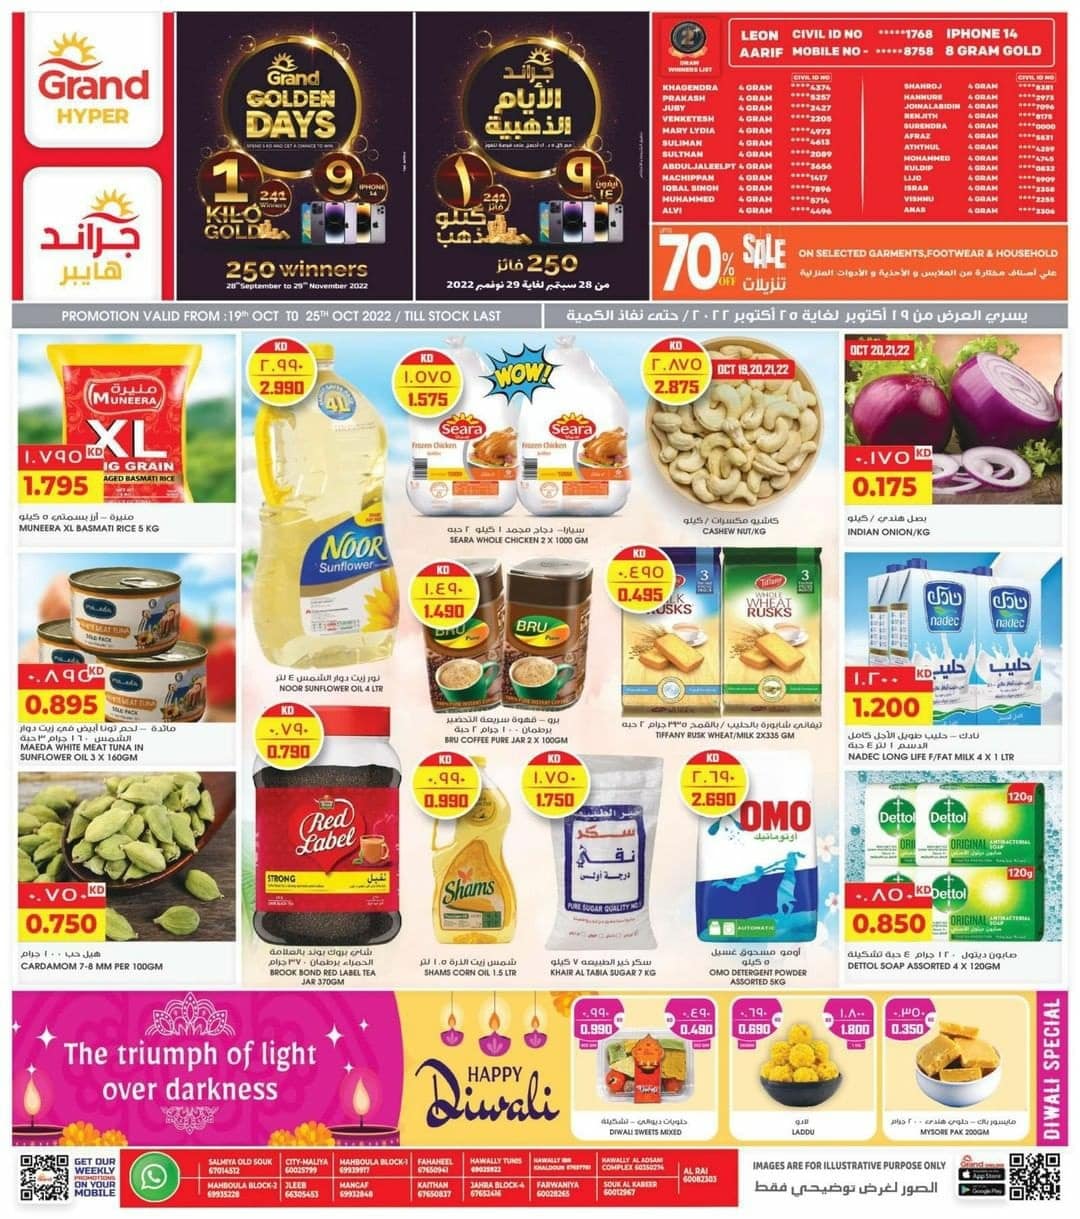 Grand Hyper Special Diwali offers 70%, Kuwait Promotions 1